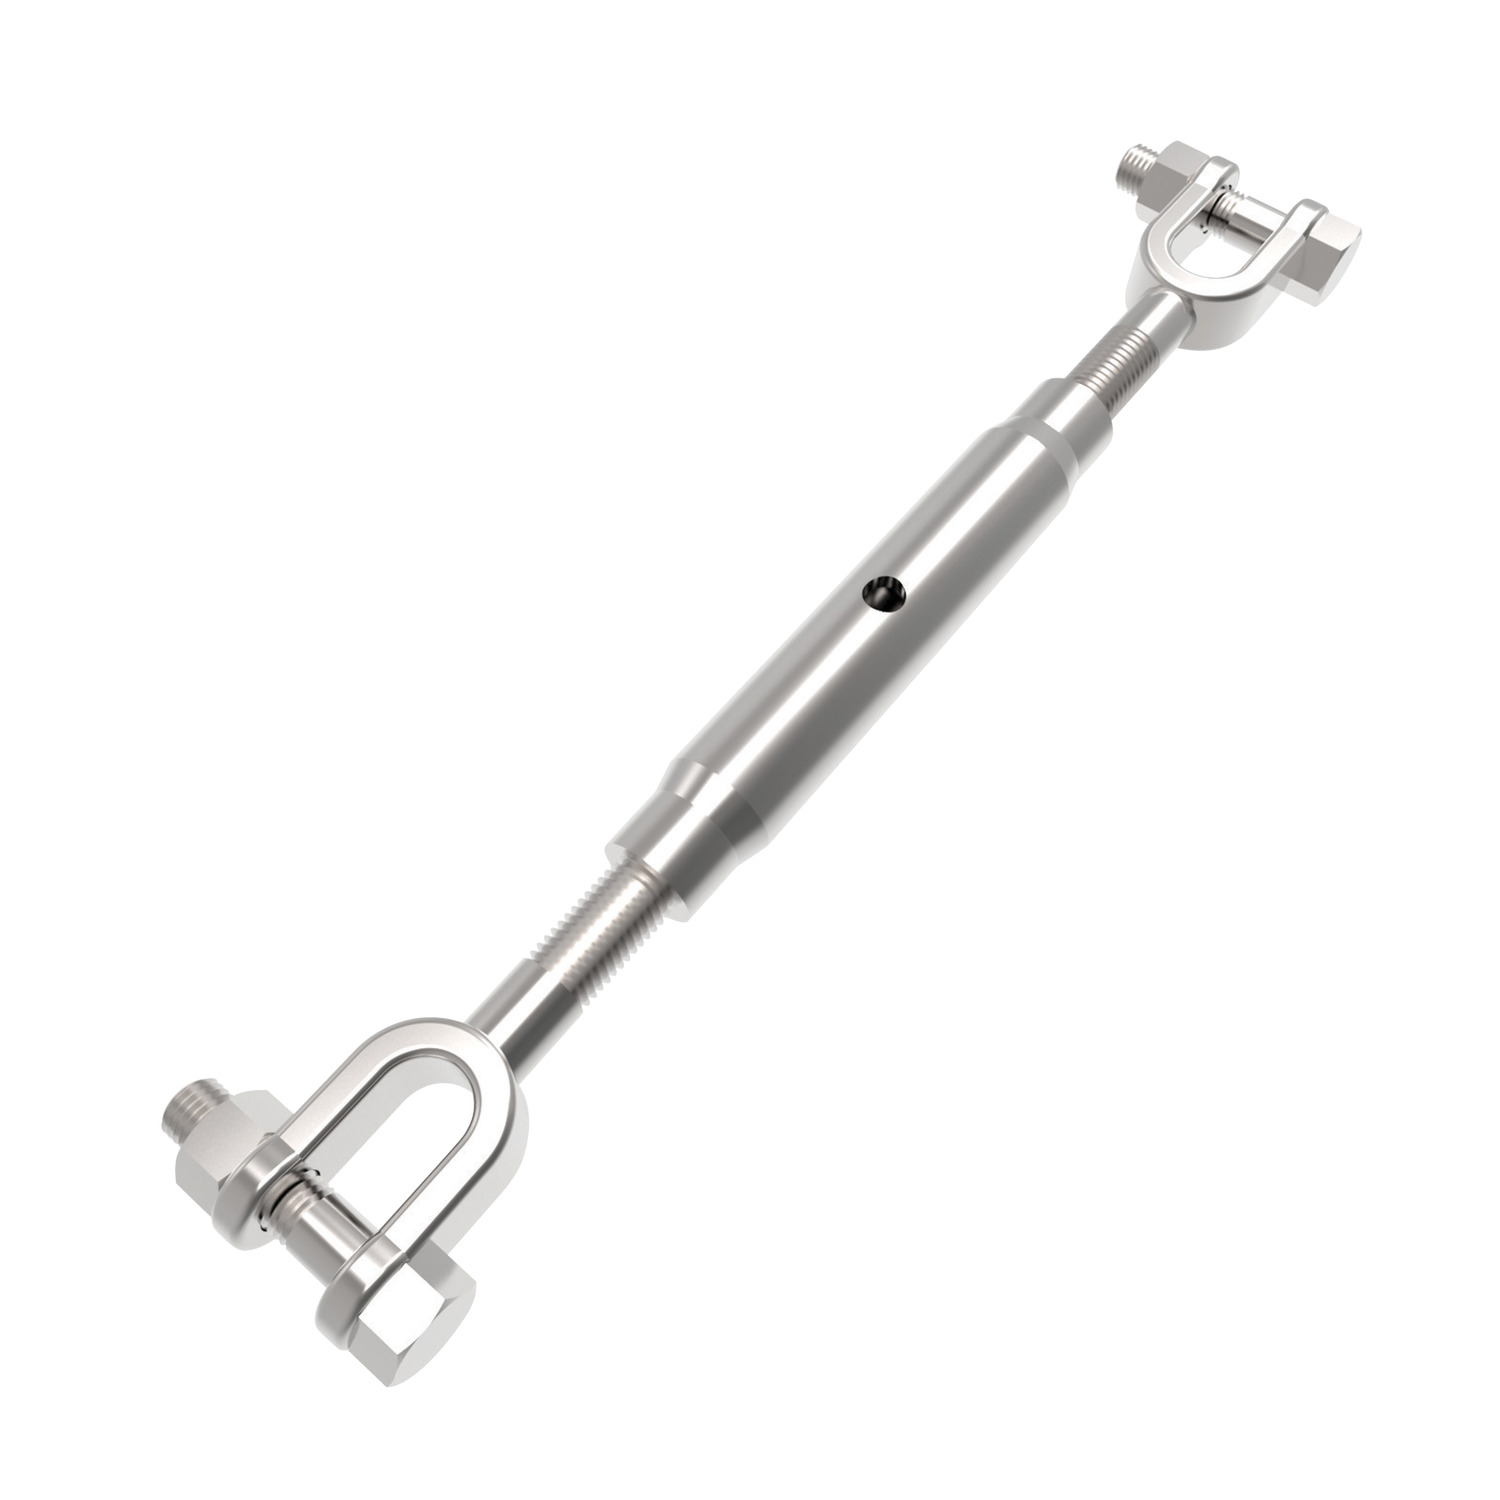 Jaw End Pipe Body Turnbuckles Steel turnbuckles manufactured to DIN 1478. Sizes ranging from M8 to M30. Lengths from 110mm to 255mm.